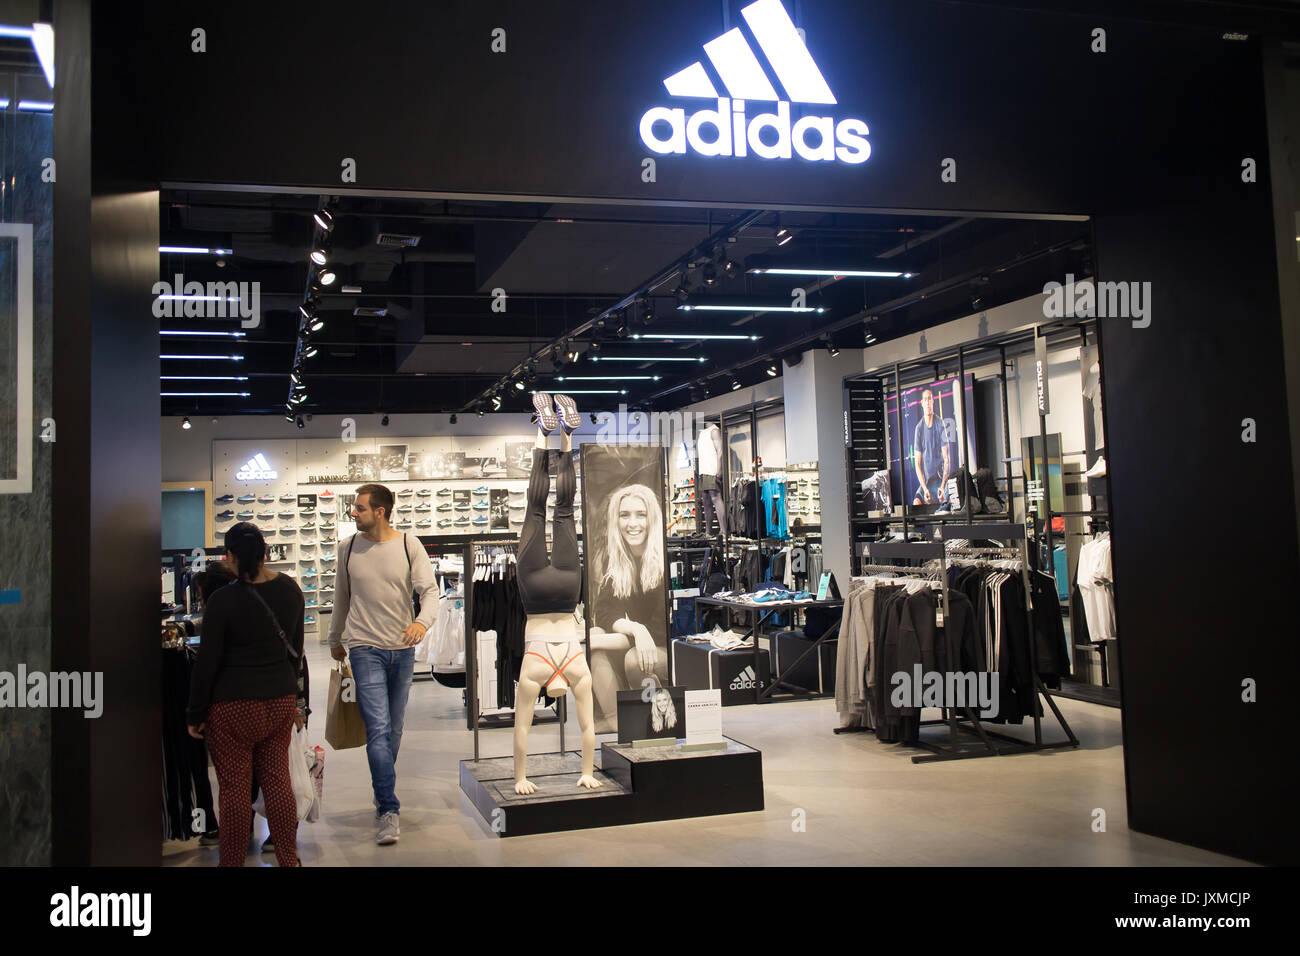 CHIANG MAI, THAILAND - AUGUST 16 2017: Adidas shop In Central Stock Photo -  Alamy